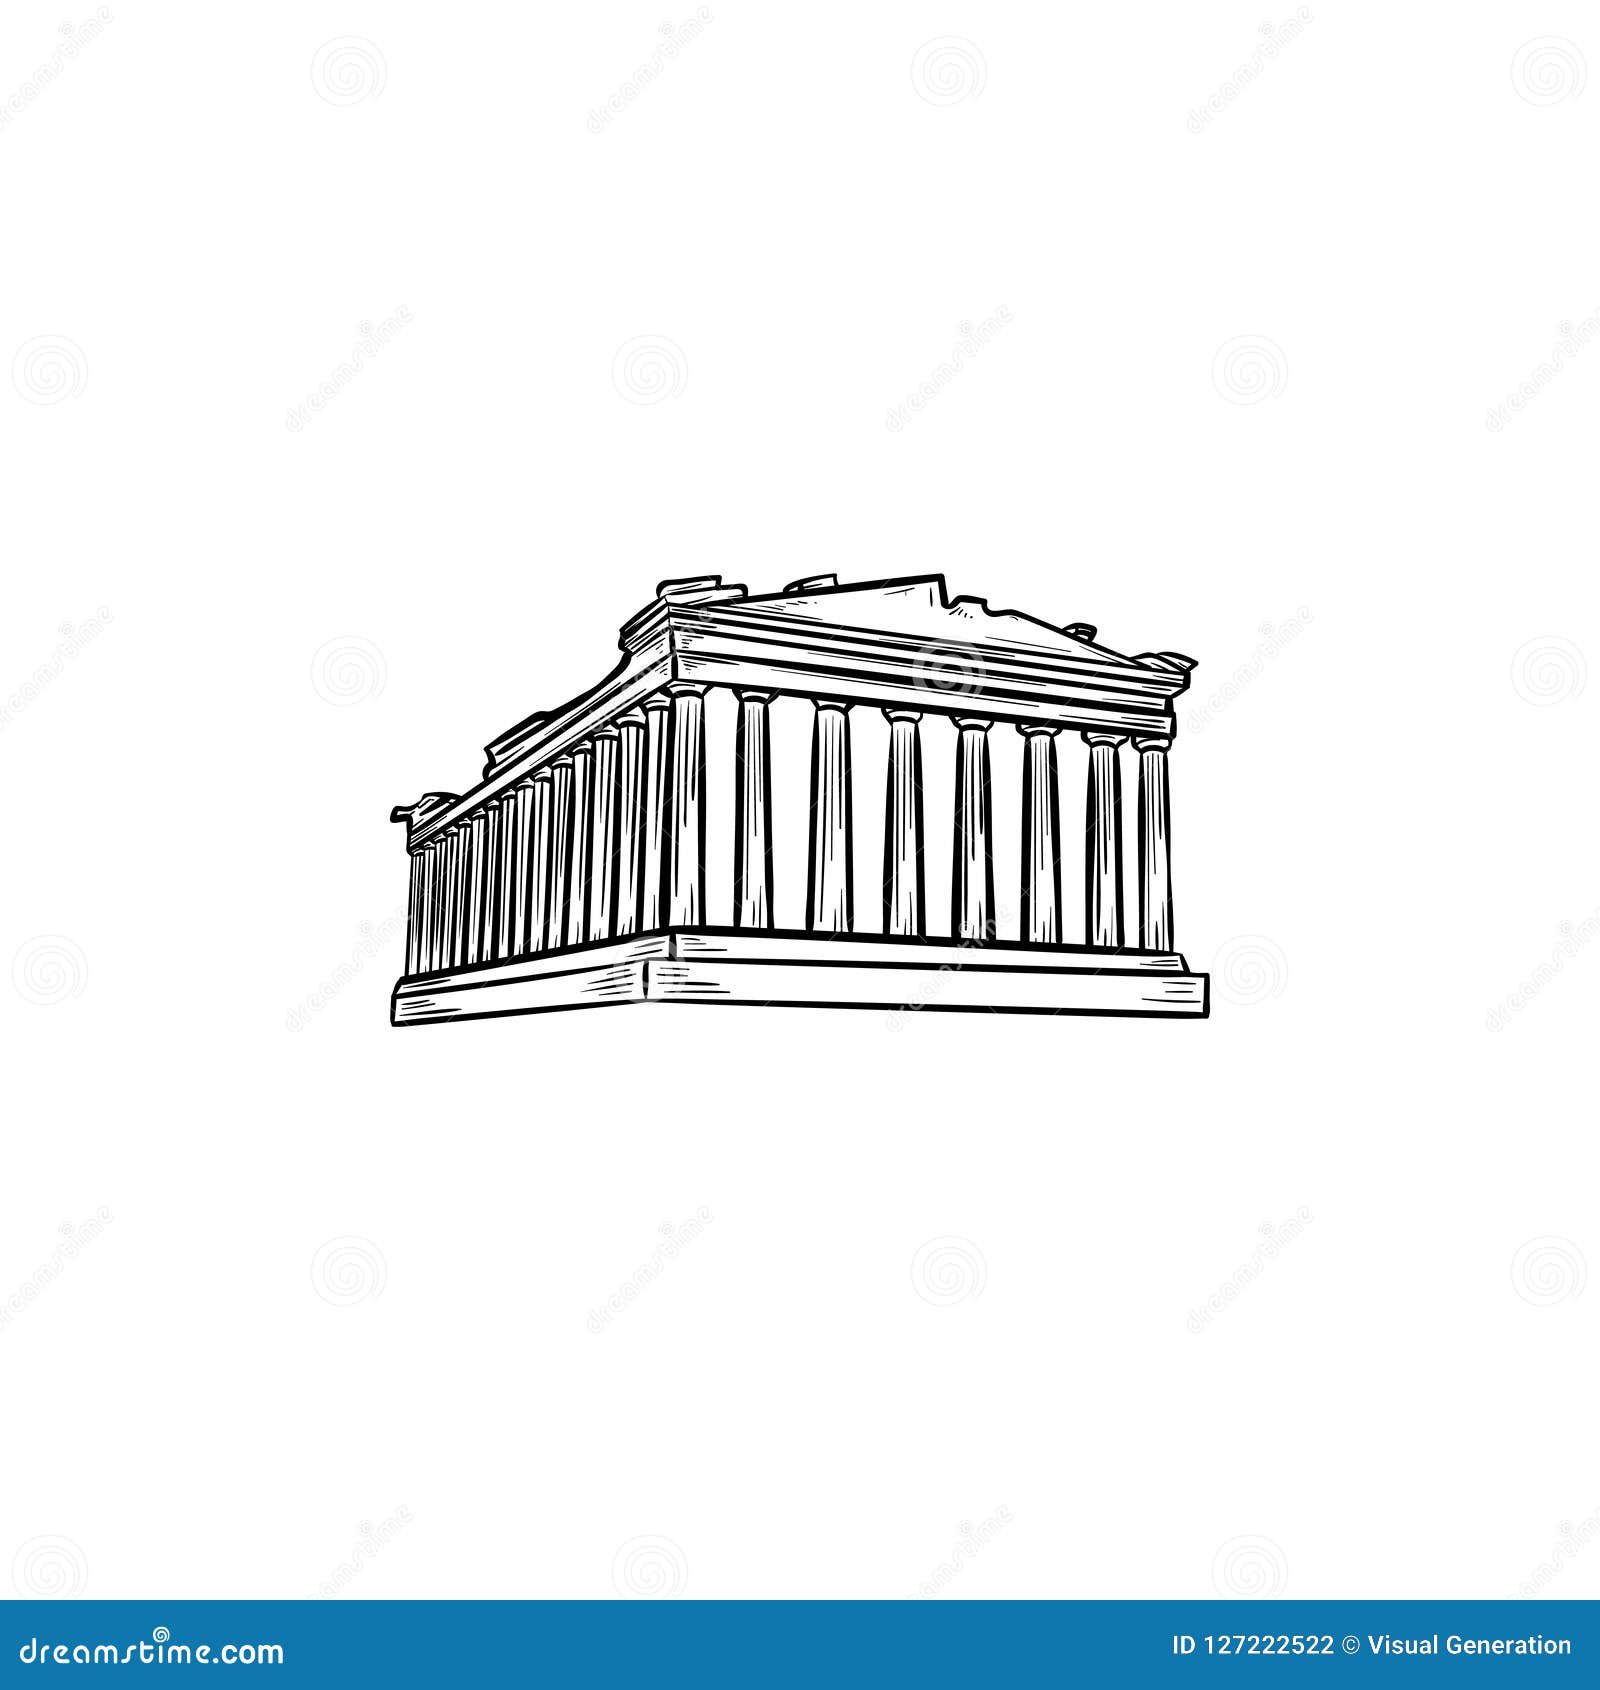 Acropolis Cartoons, Illustrations & Vector Stock Images - 2815 Pictures ...